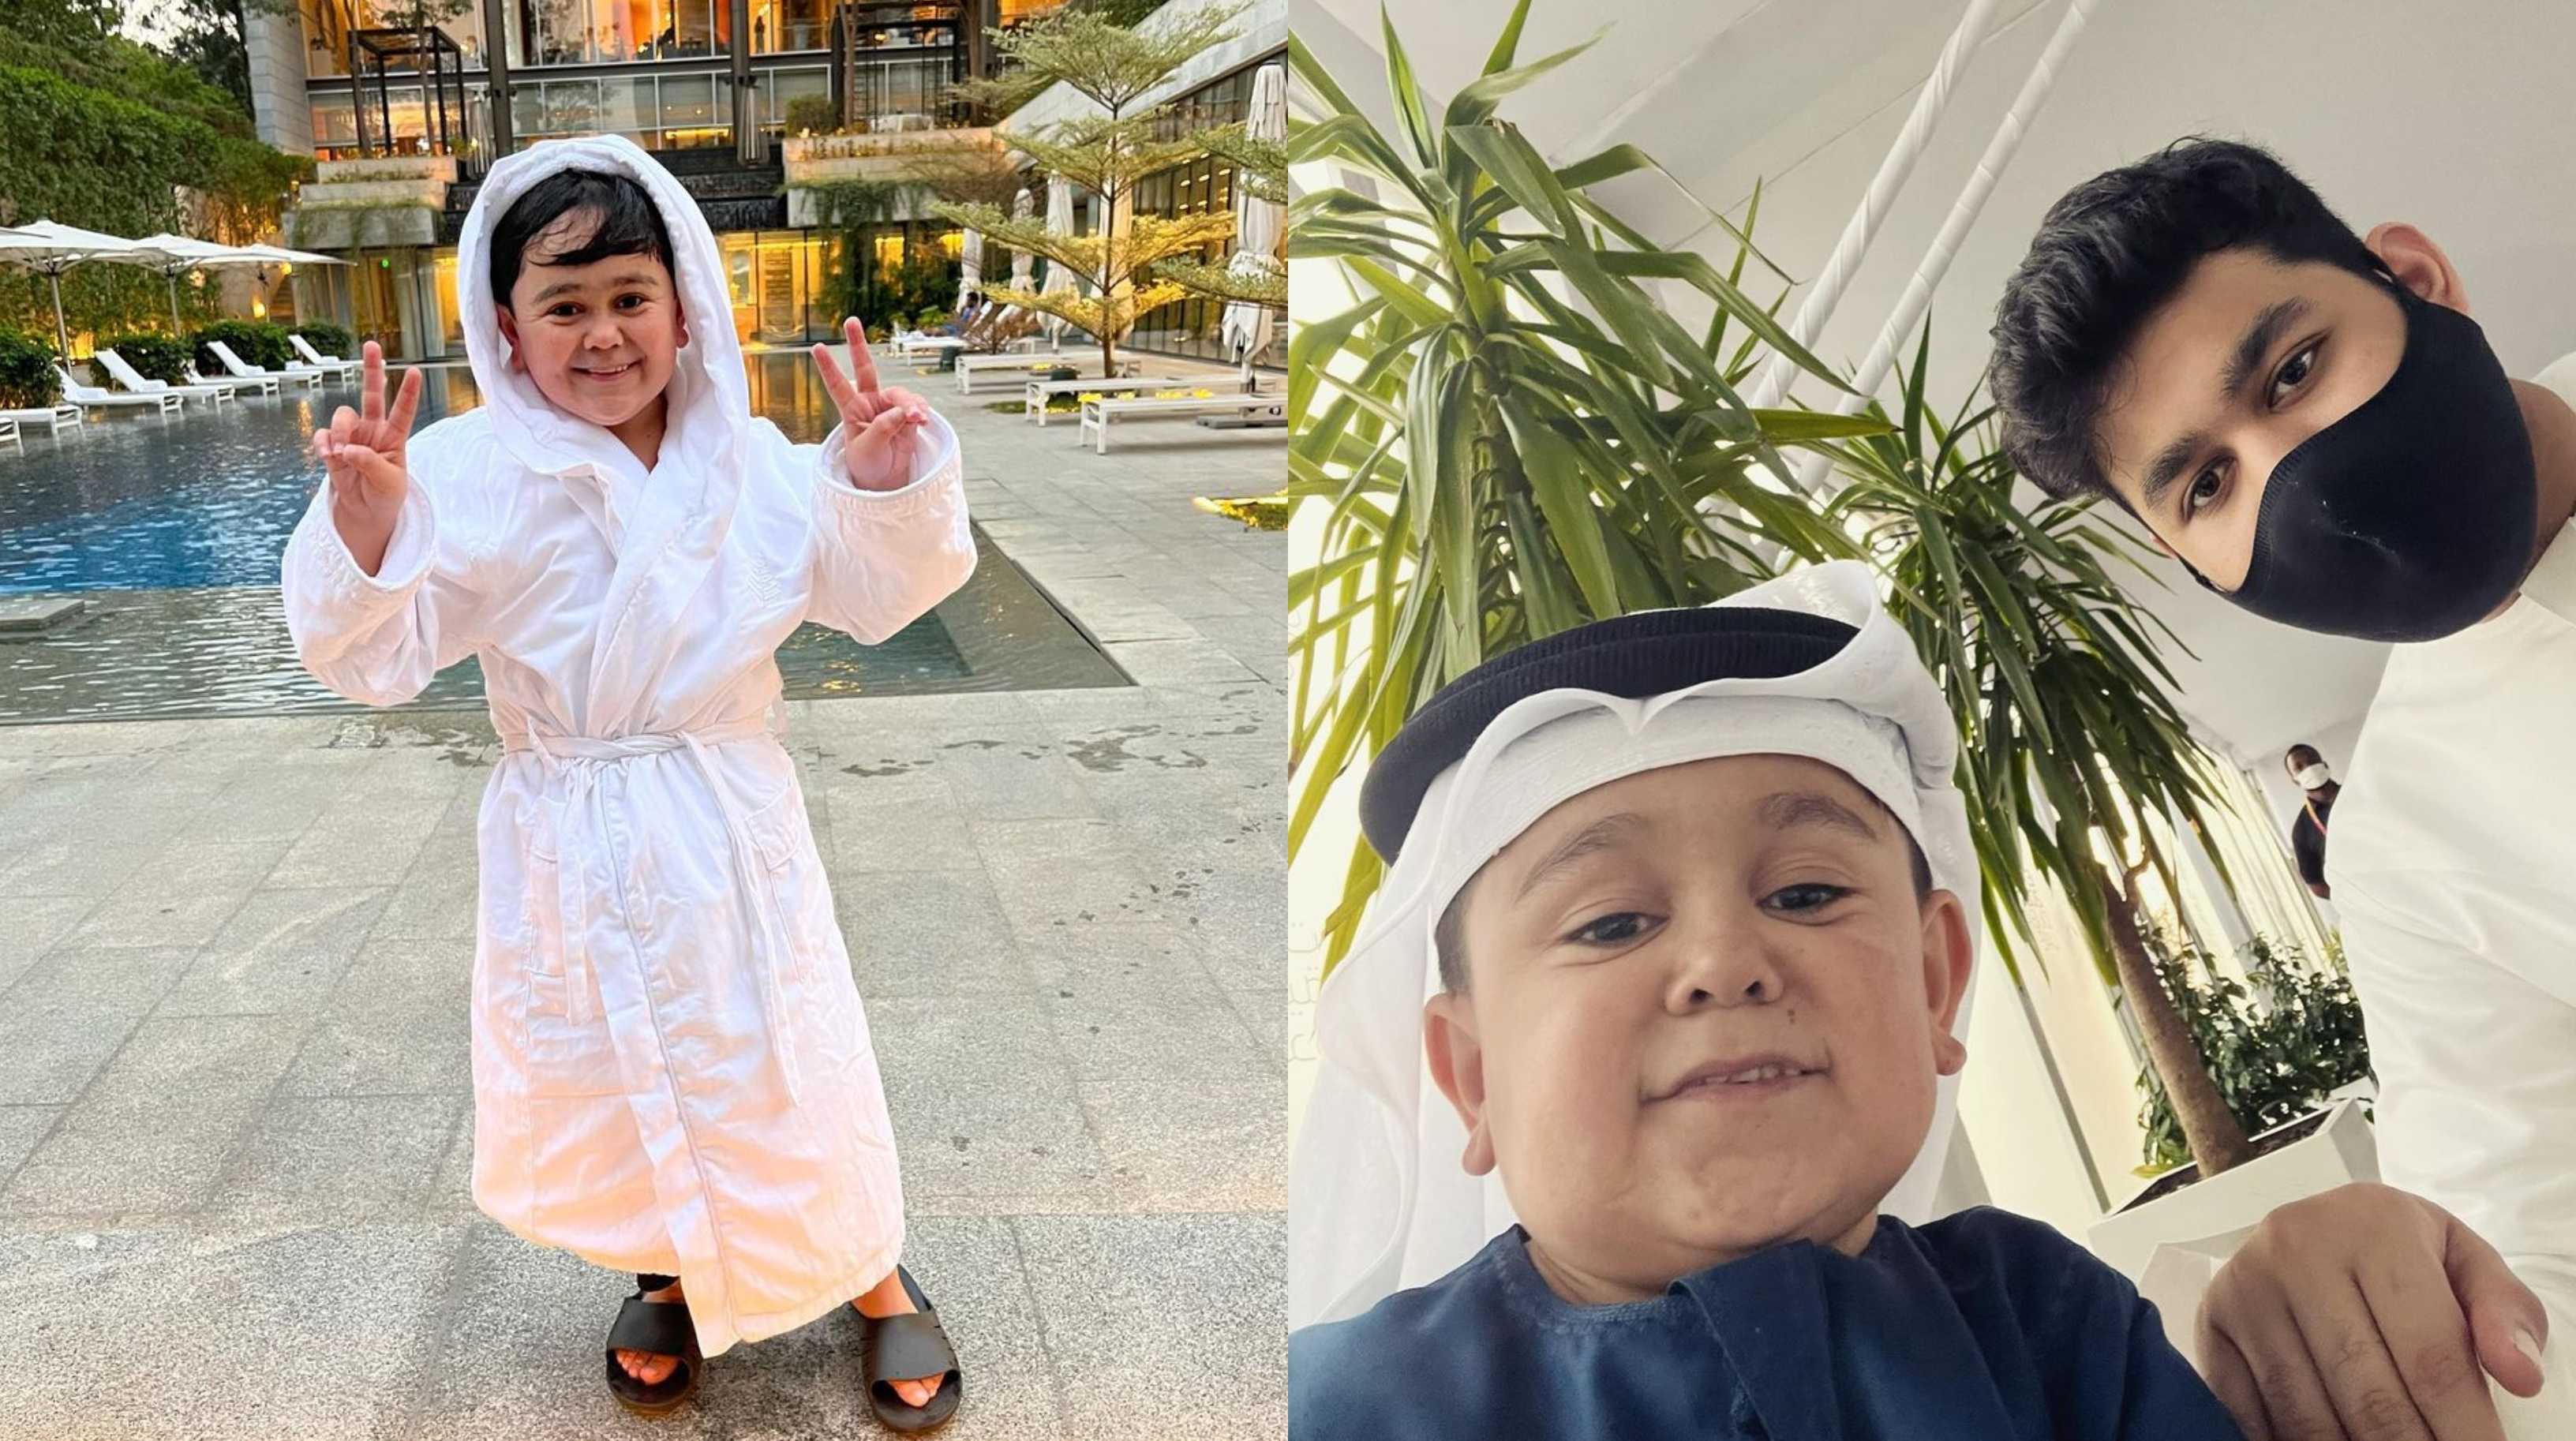 AR Rahman's son AR Ameen notices growth in Abdu Rozik’s height during recent meeting; shares a cute selfie